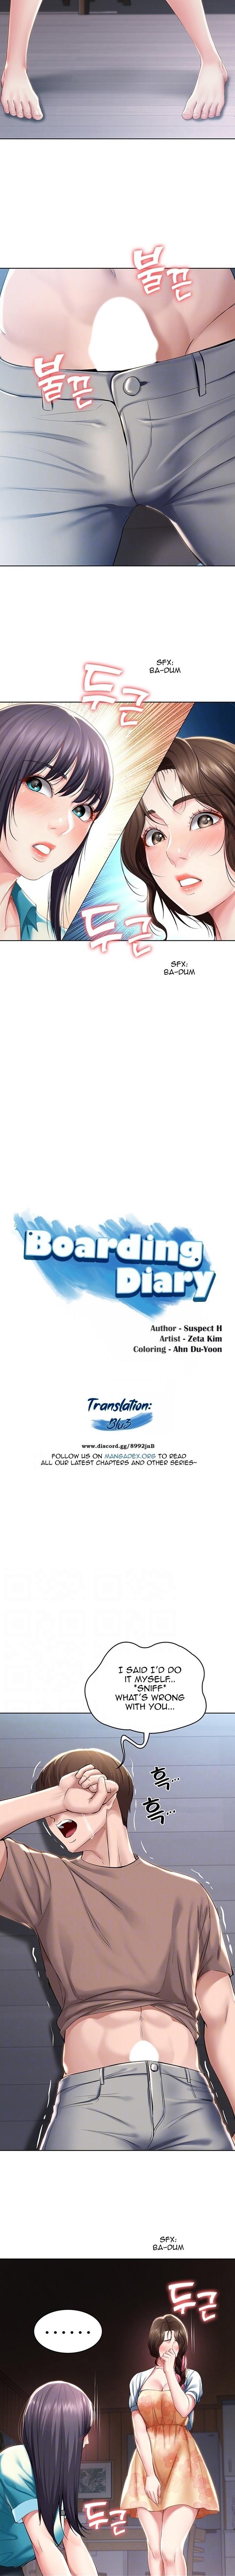 Boarding Diary Chapter 35 page 2 - onlyyouchapters.com